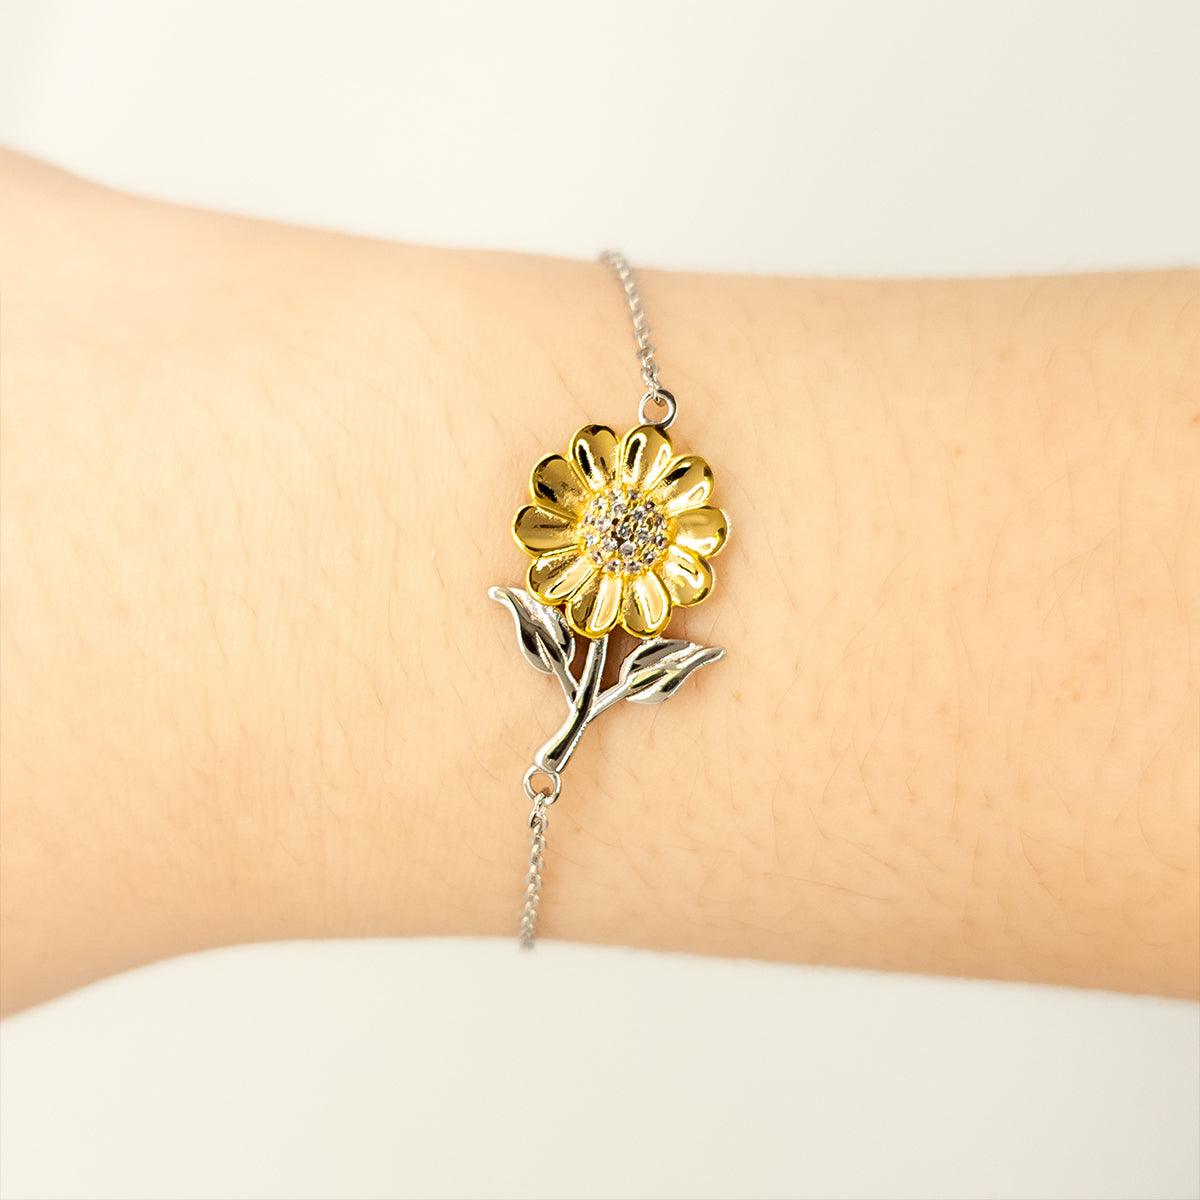 Model Sunflower Bracelet - Thanks for being who you are - Birthday Christmas Jewelry Gifts Coworkers Colleague Boss - Mallard Moon Gift Shop